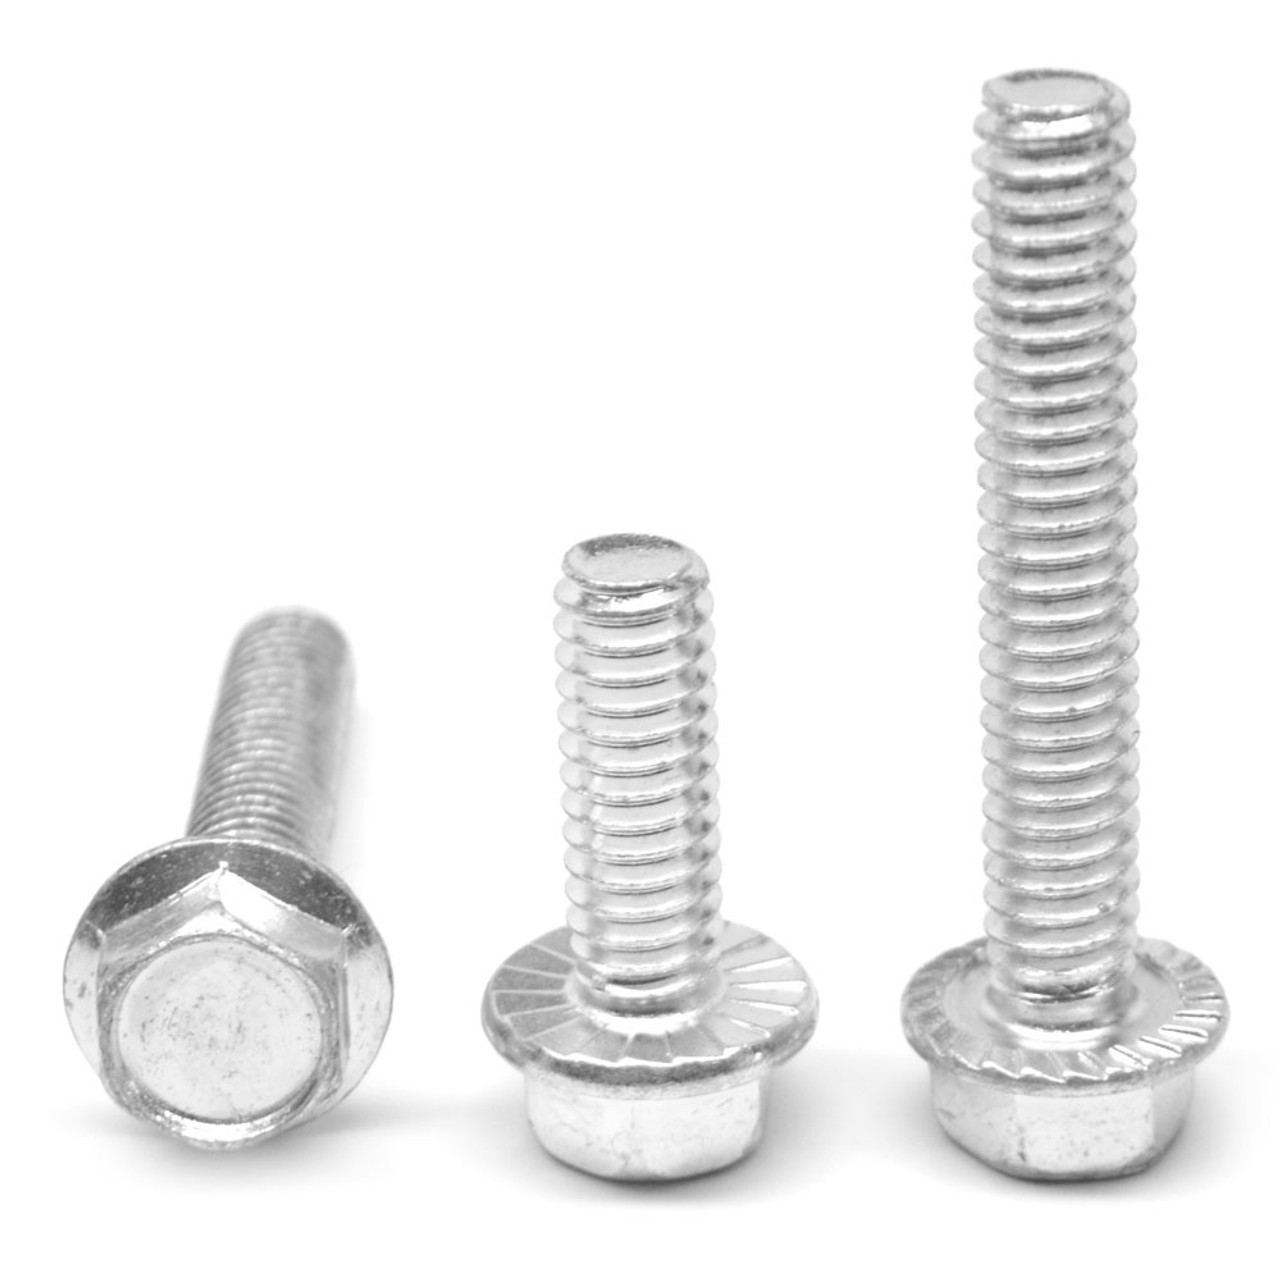 1/4"-20 x 1 1/4" (FT) Coarse Thread Hex Flange Screw with Serration Stainless Steel 18-8 Wax